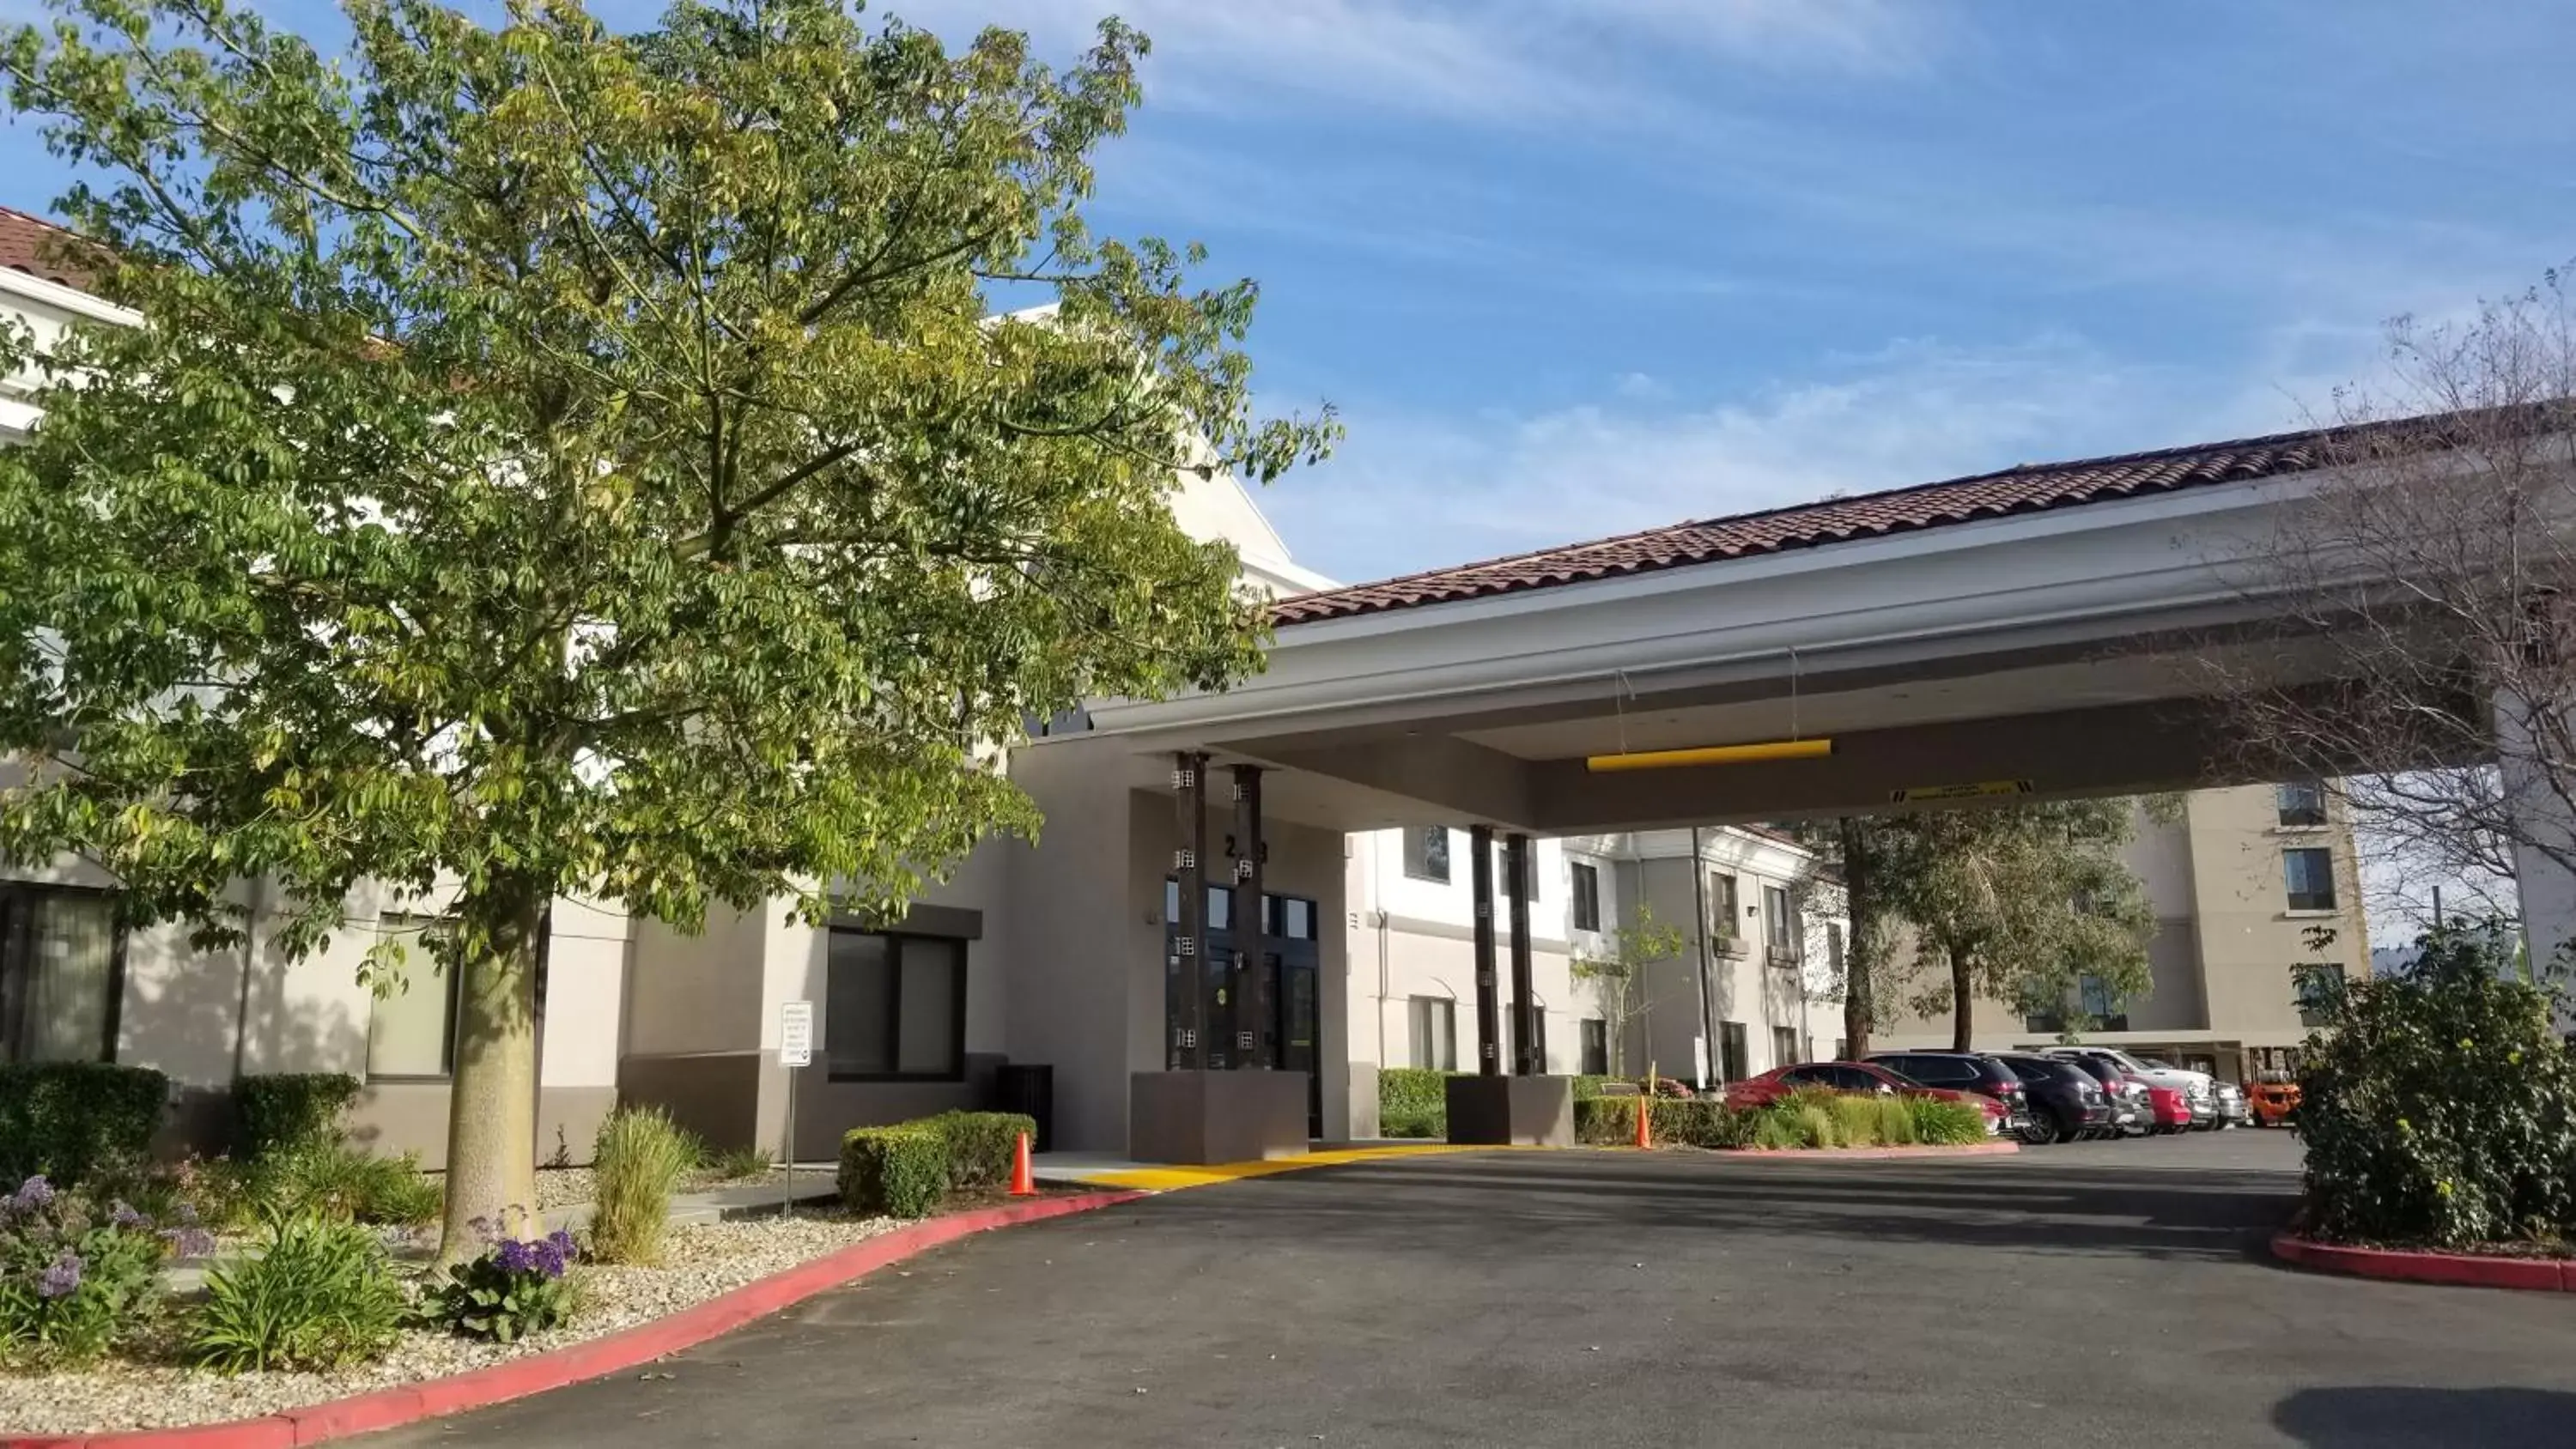 Property building in Best Western Valencia/Six Flags Inn & Suites